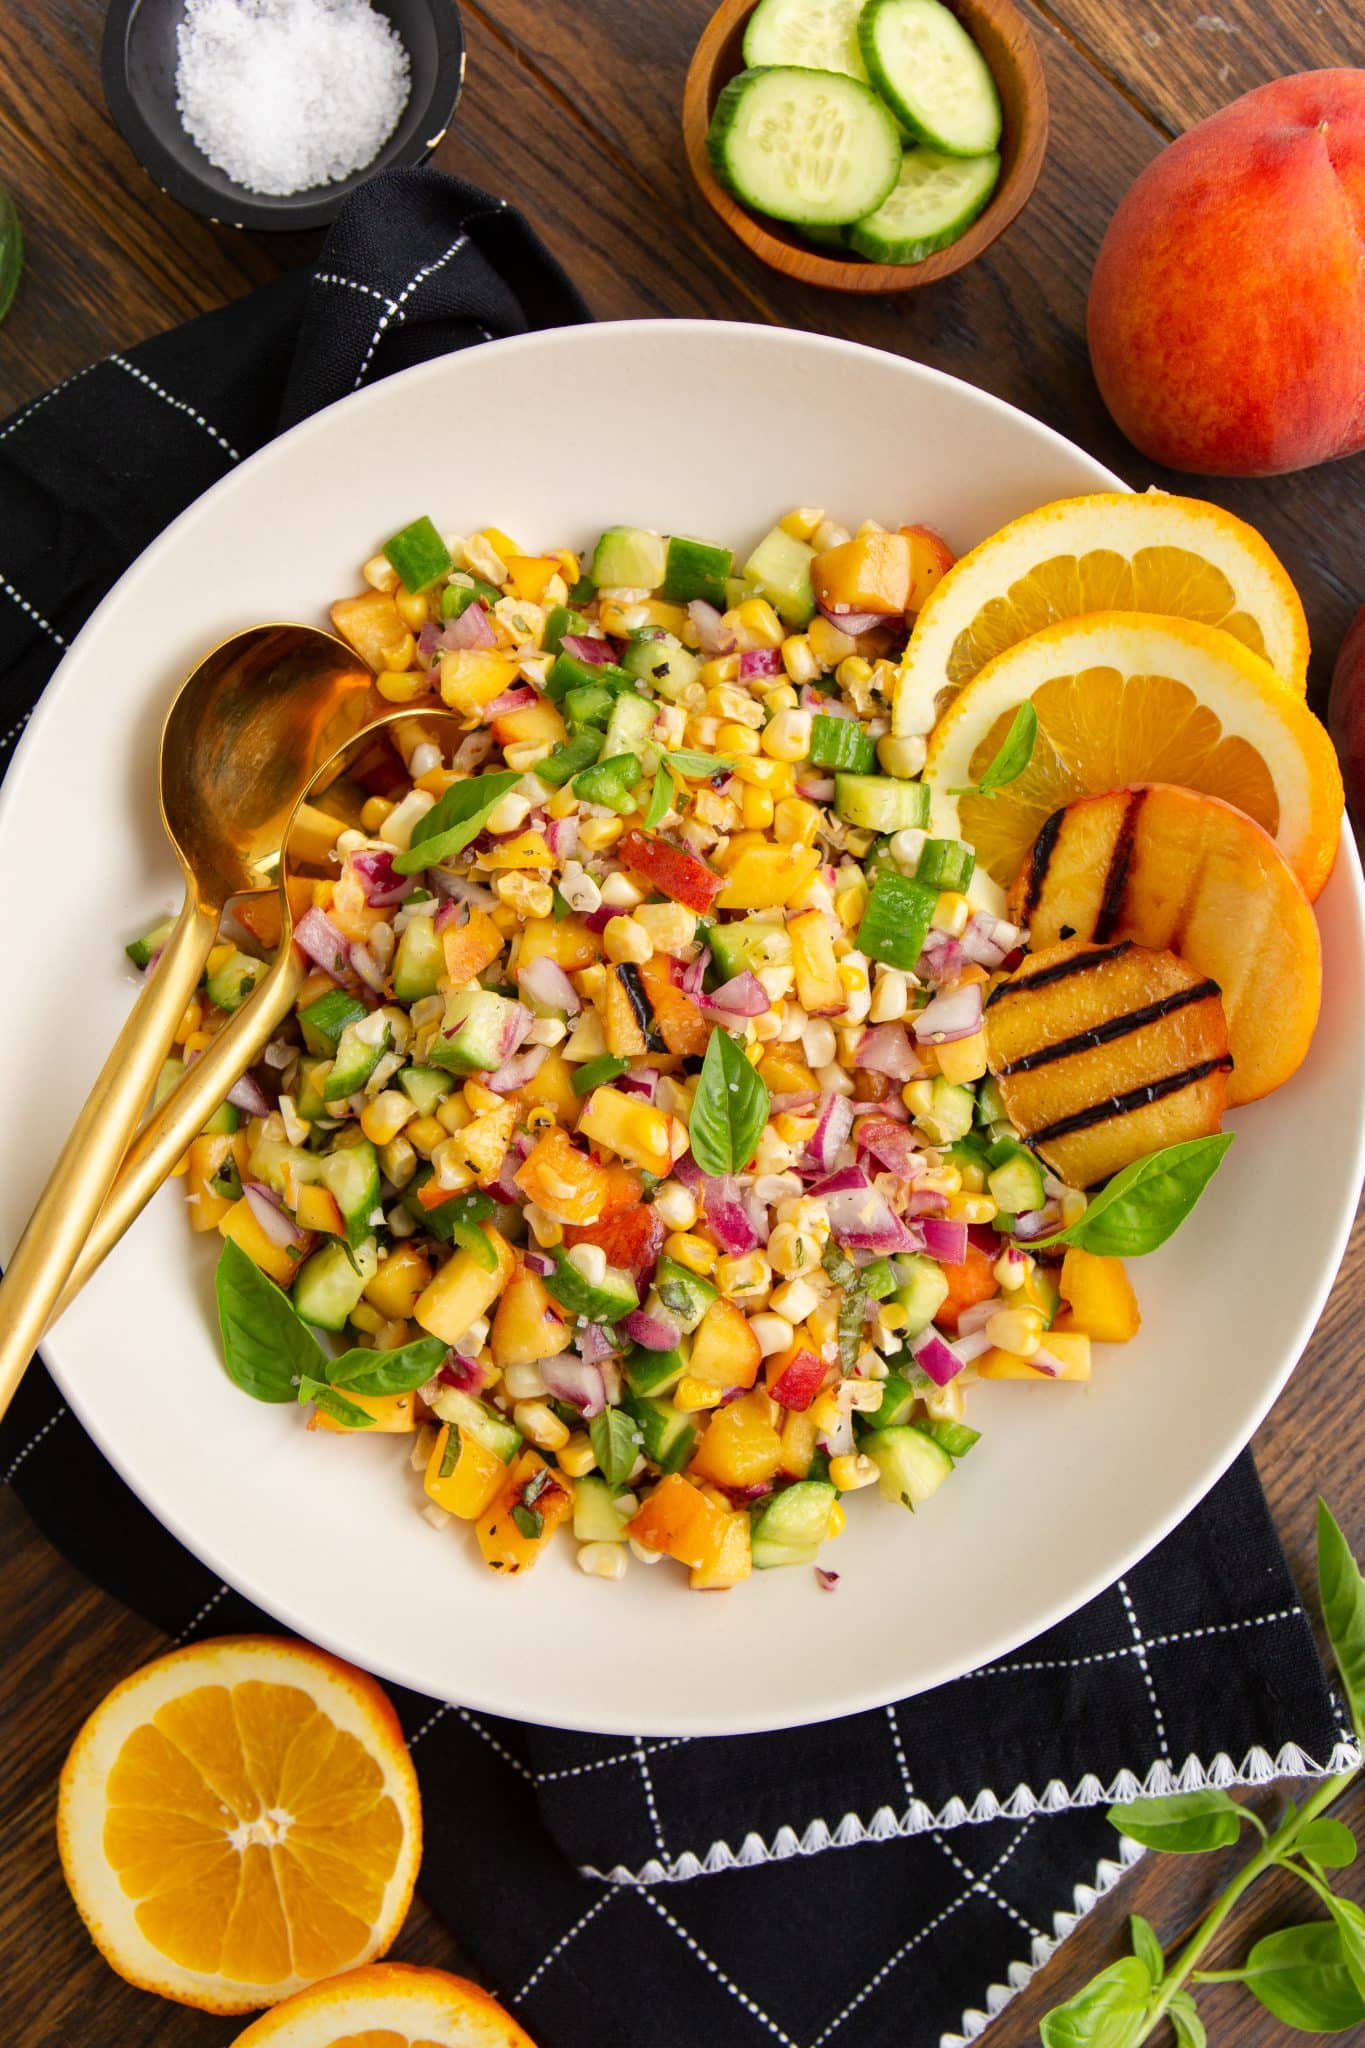 A colorful salad with chopped vegetables and fruits in a white bowl, garnished with basil leaves. Sliced oranges and grilled fruit are on the side, with metal utensils placed on the rim of the bowl.